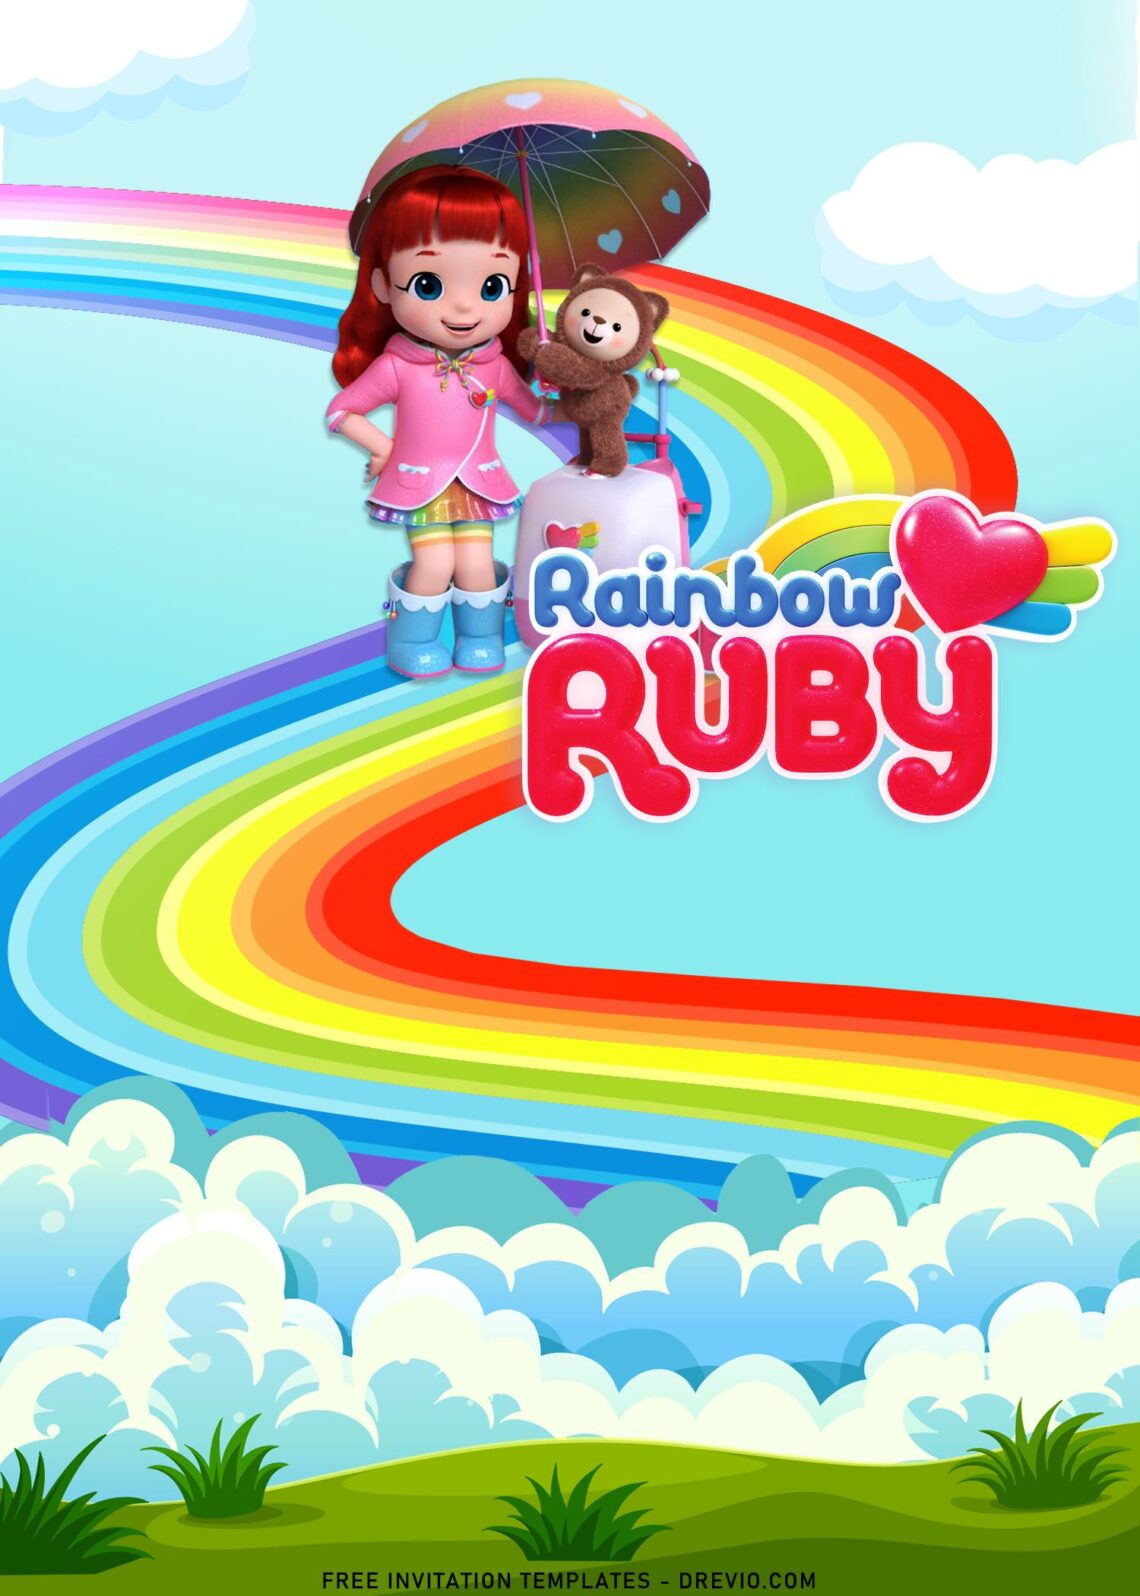 11+ Rainbow Ruby Birthday Invitation Templates For Your Daughter’s